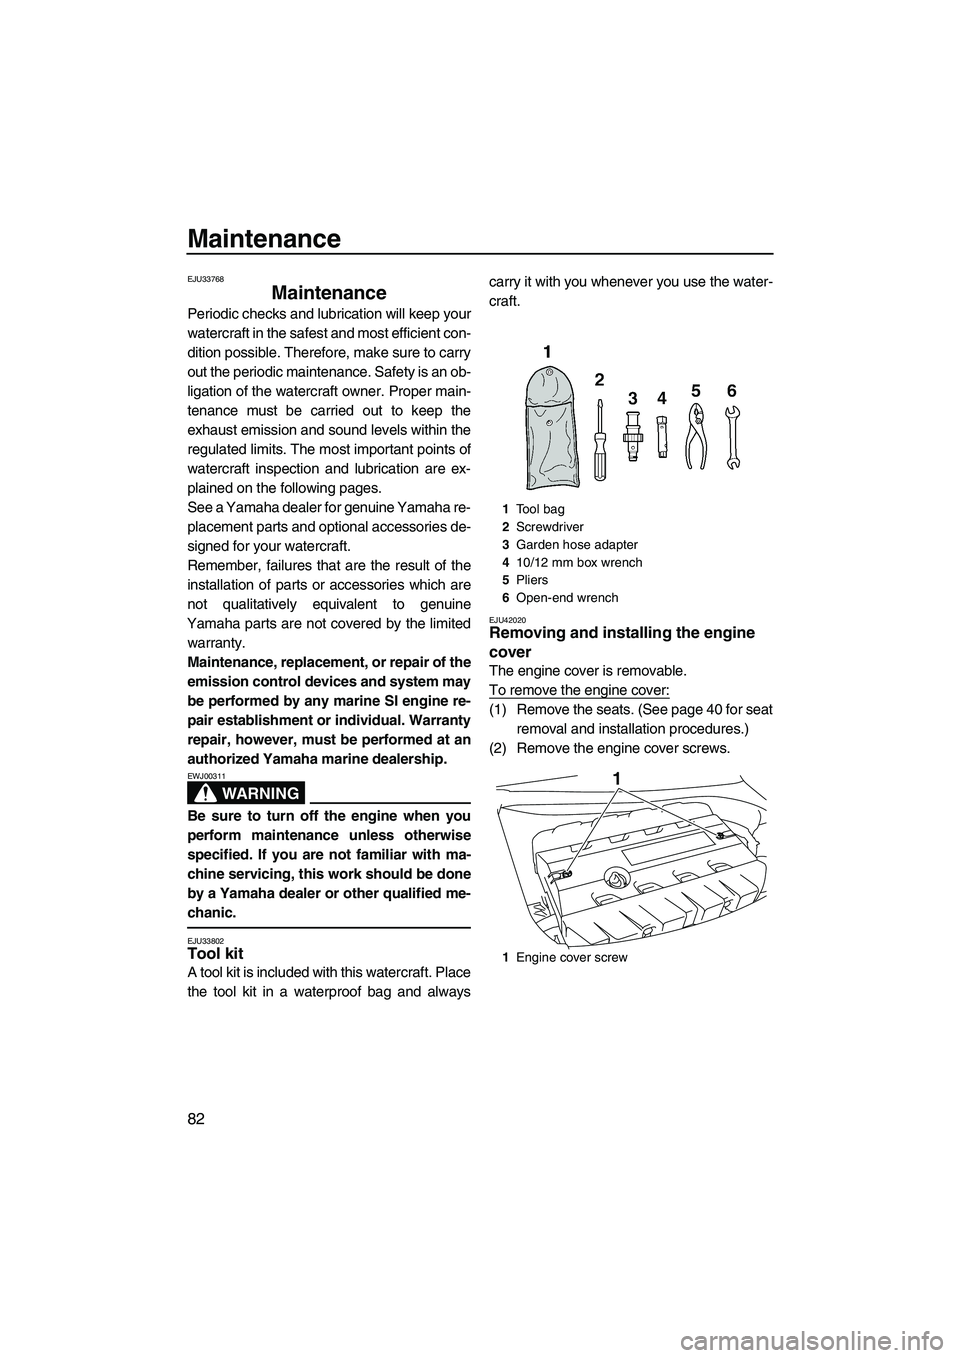 YAMAHA FZR 2012 Owners Guide Maintenance
82
EJU33768
Maintenance 
Periodic checks and lubrication will keep your
watercraft in the safest and most efficient con-
dition possible. Therefore, make sure to carry
out the periodic mai